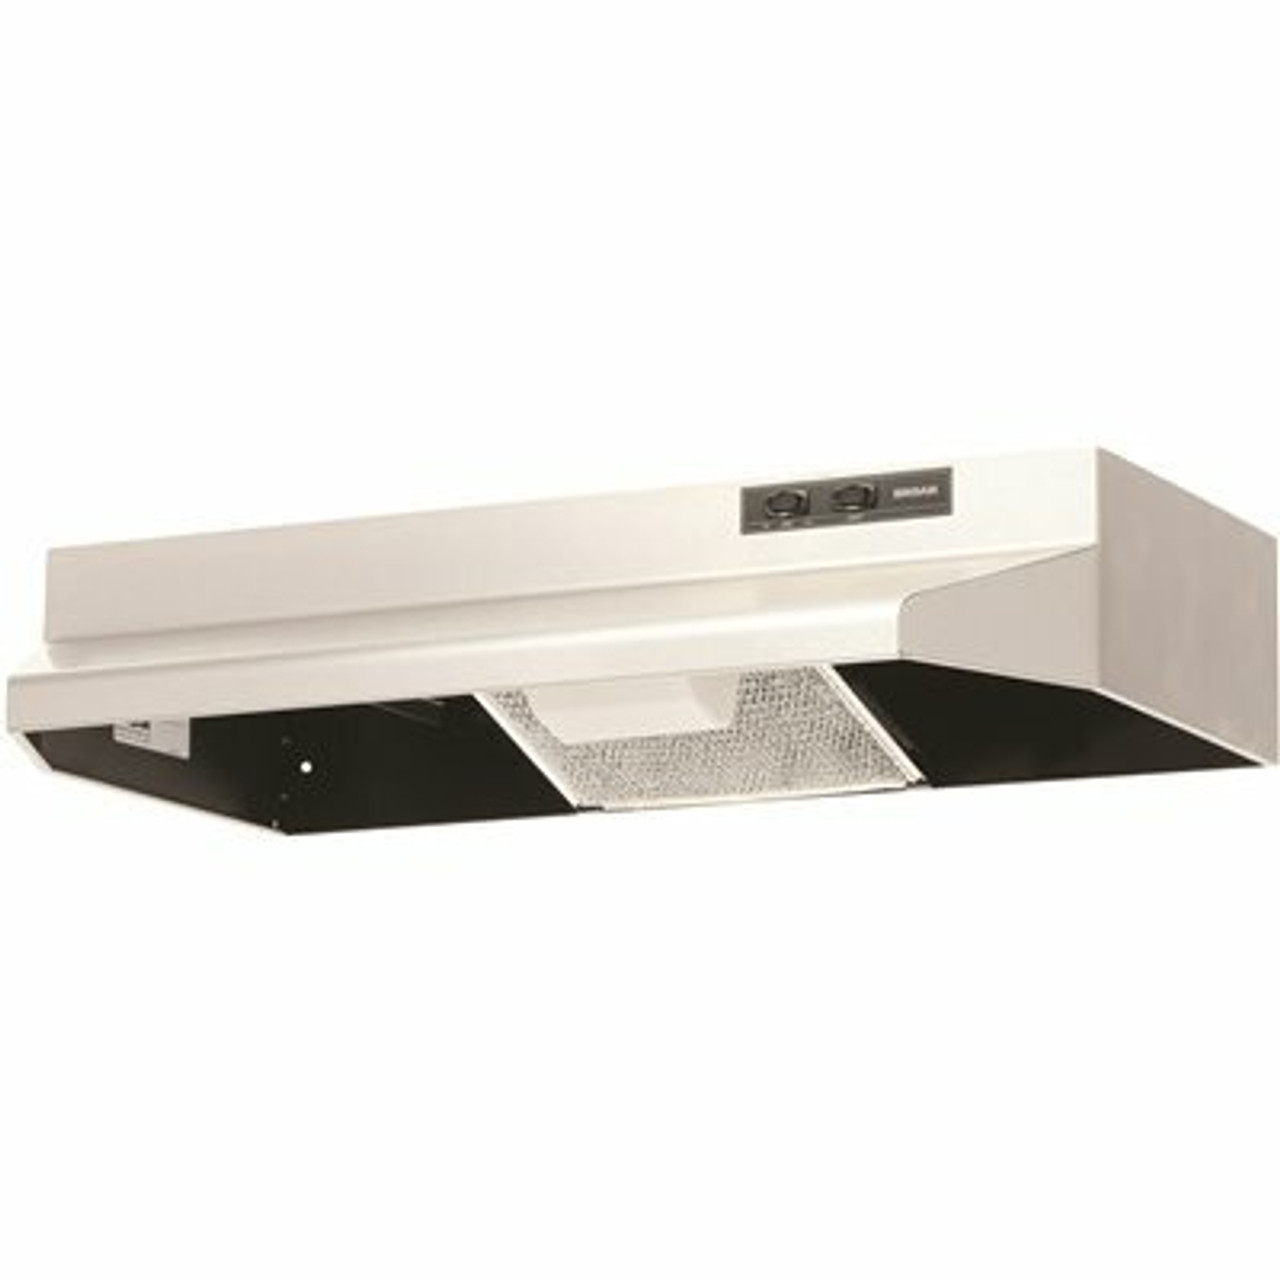 Broan-Nutone 40000 Series 30 In. 210 Max Blower Cfm Ducted Under-Cabinet Range Hood With Light In Stainless Steel